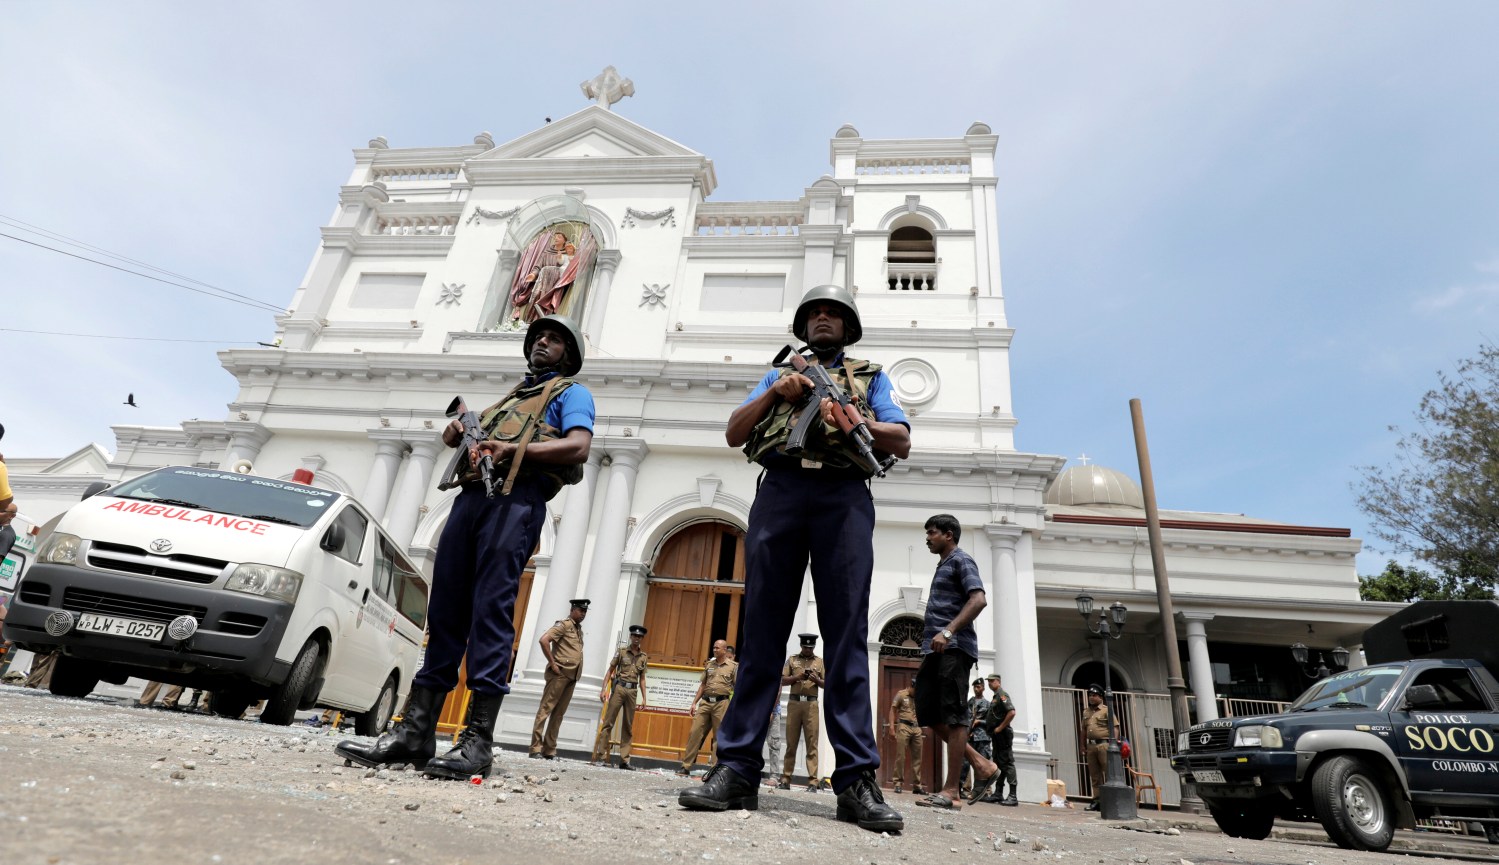 Sri Lankan military officials stand guard in front of the St. Anthony's Shrine, Kochchikade church after an explosion in Colombo, Sri Lanka April 21, 2019. REUTERS/Dinuka Liyanawatte - RC1E2EE98B10